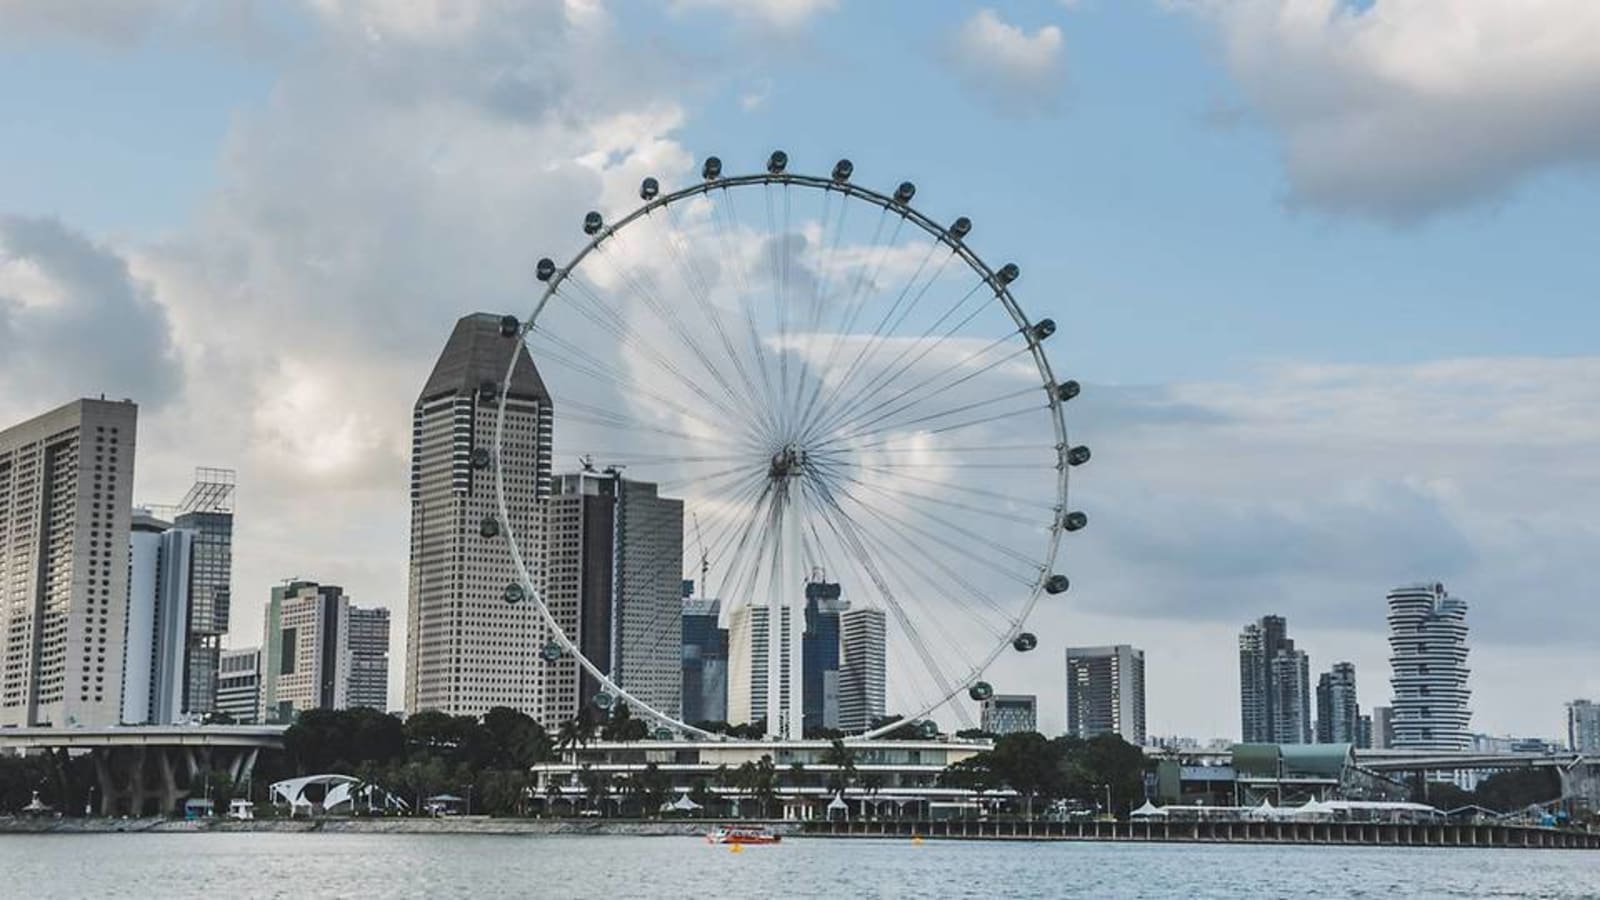 singapore-flyer-to-reopen-on-apr-15-after-resolving-‘technical-issue’